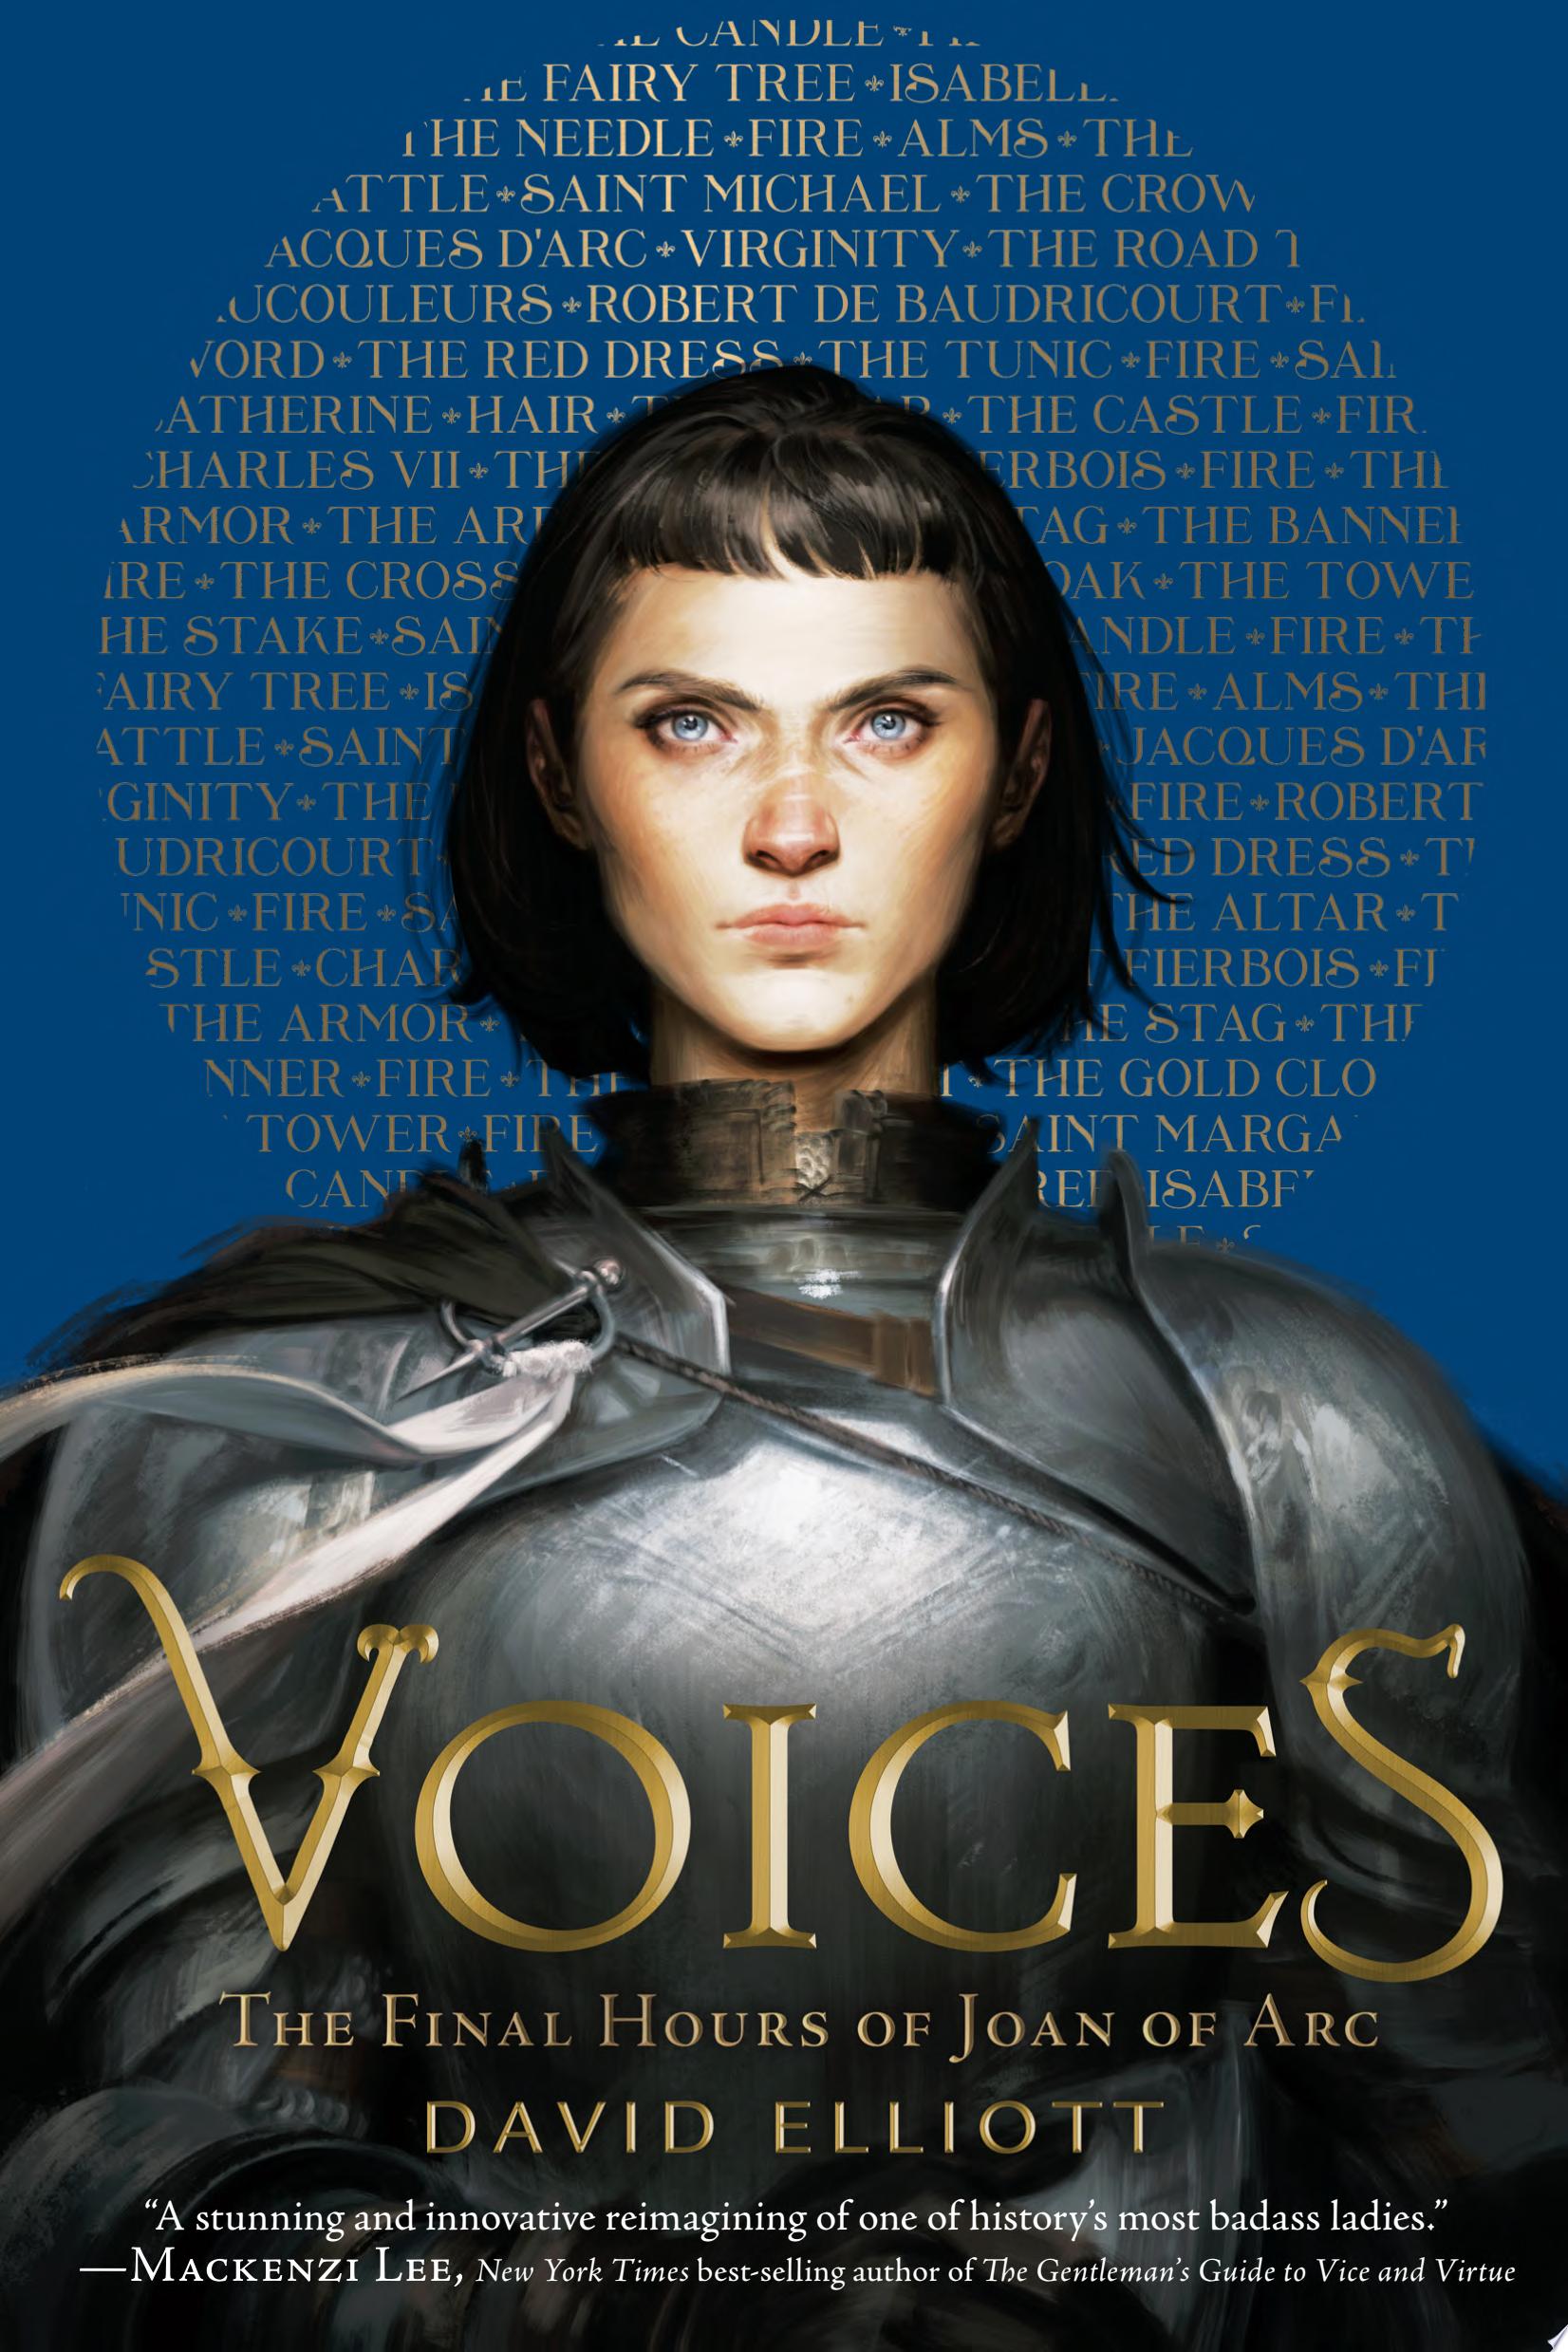 Image for "Voices"